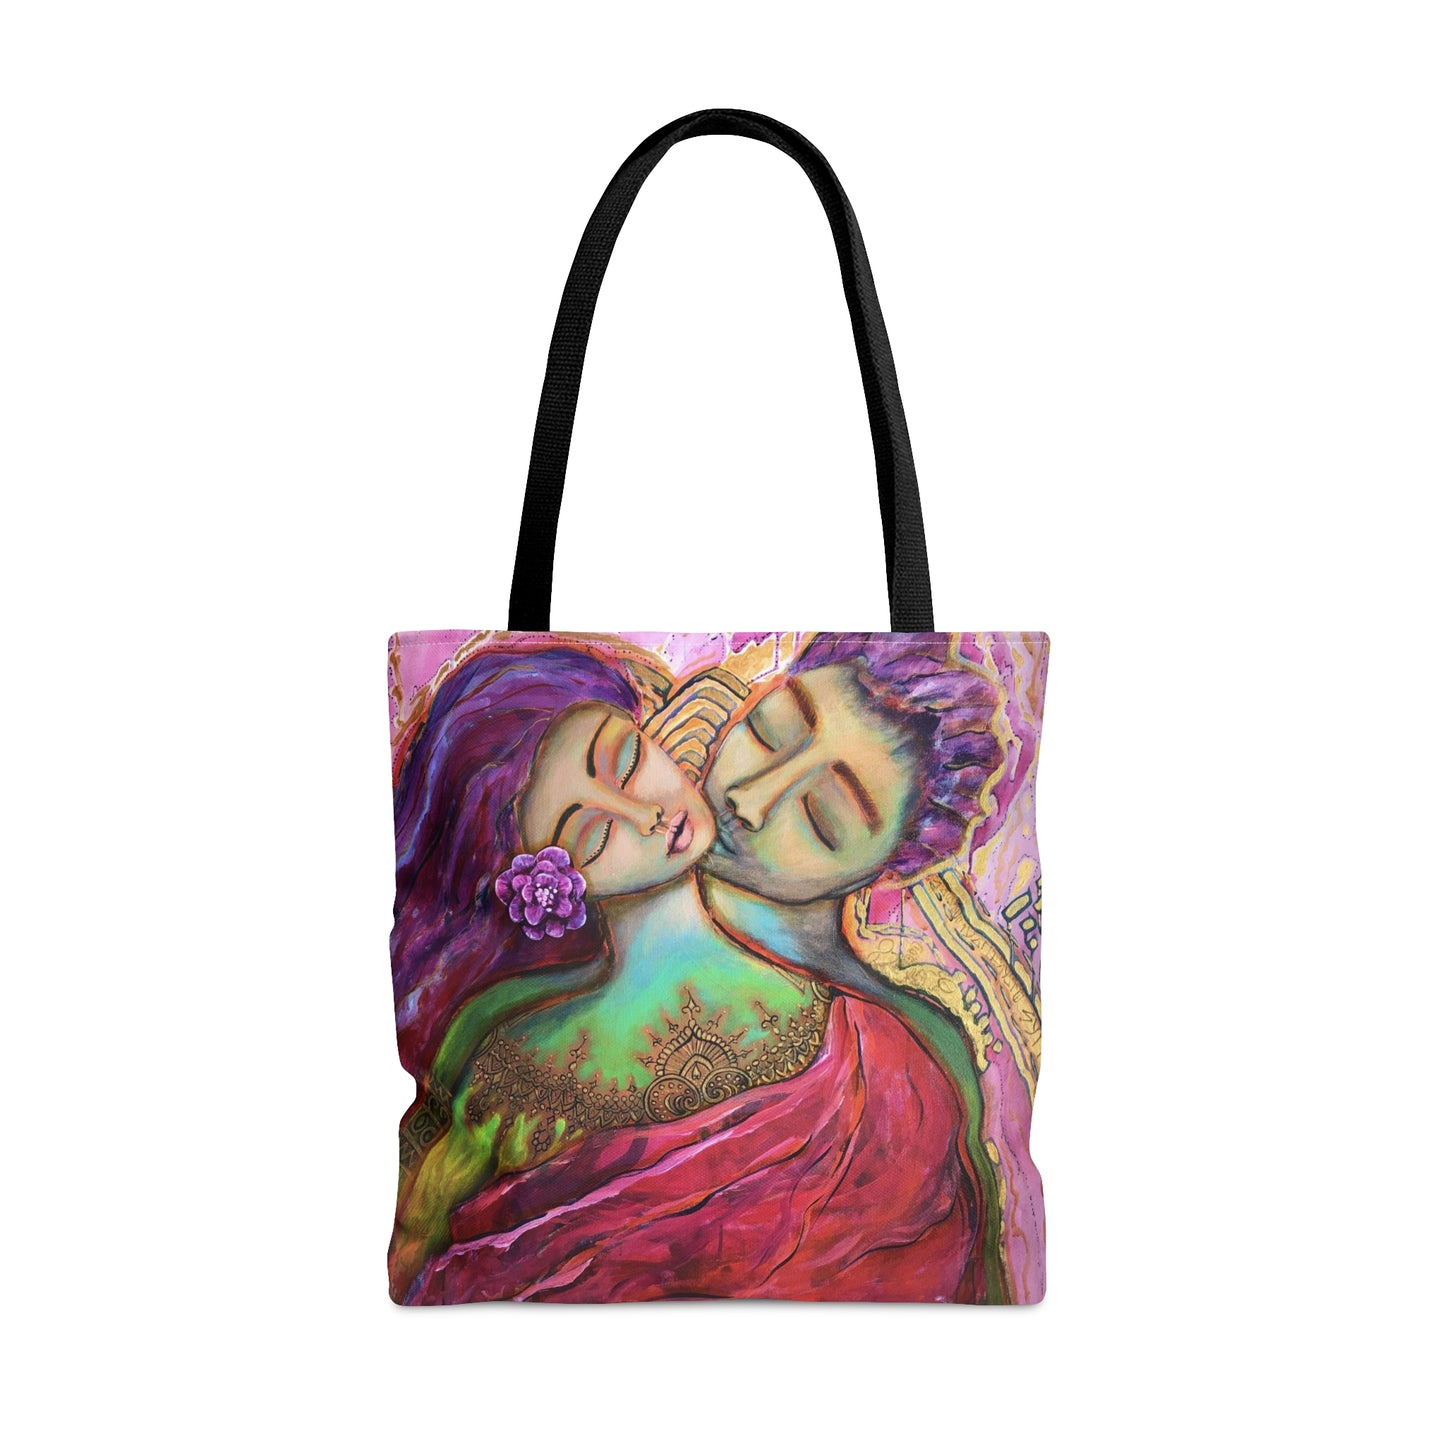 "Love in the Golden Light" Printed Tote Bag